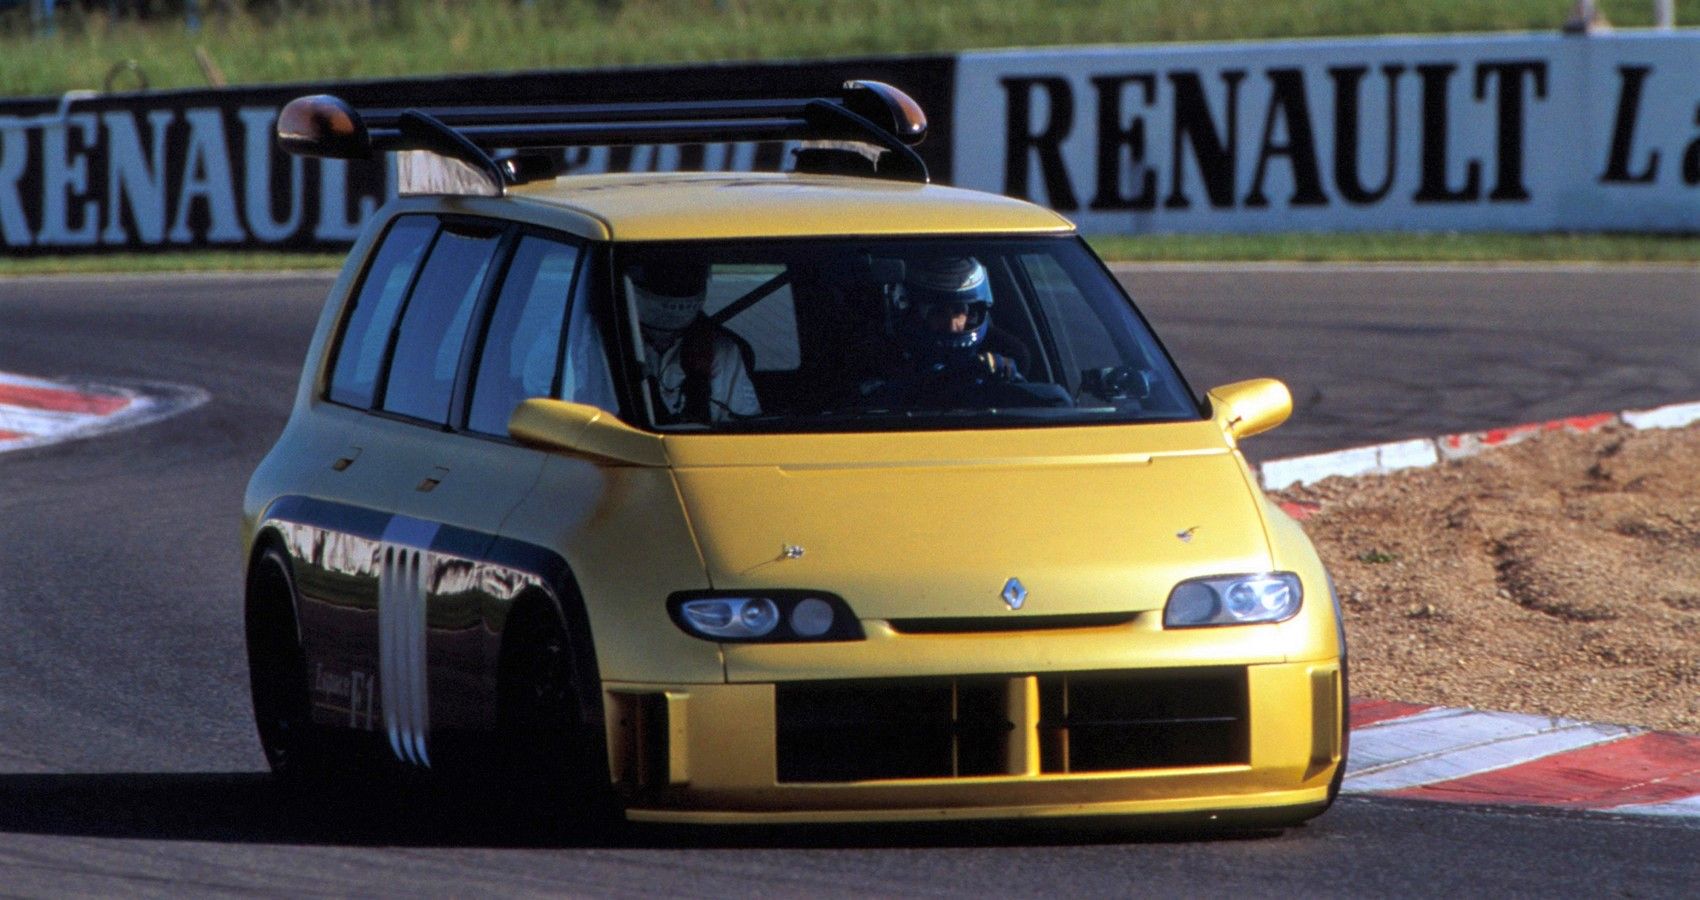 Renault Espace F1 - Front view